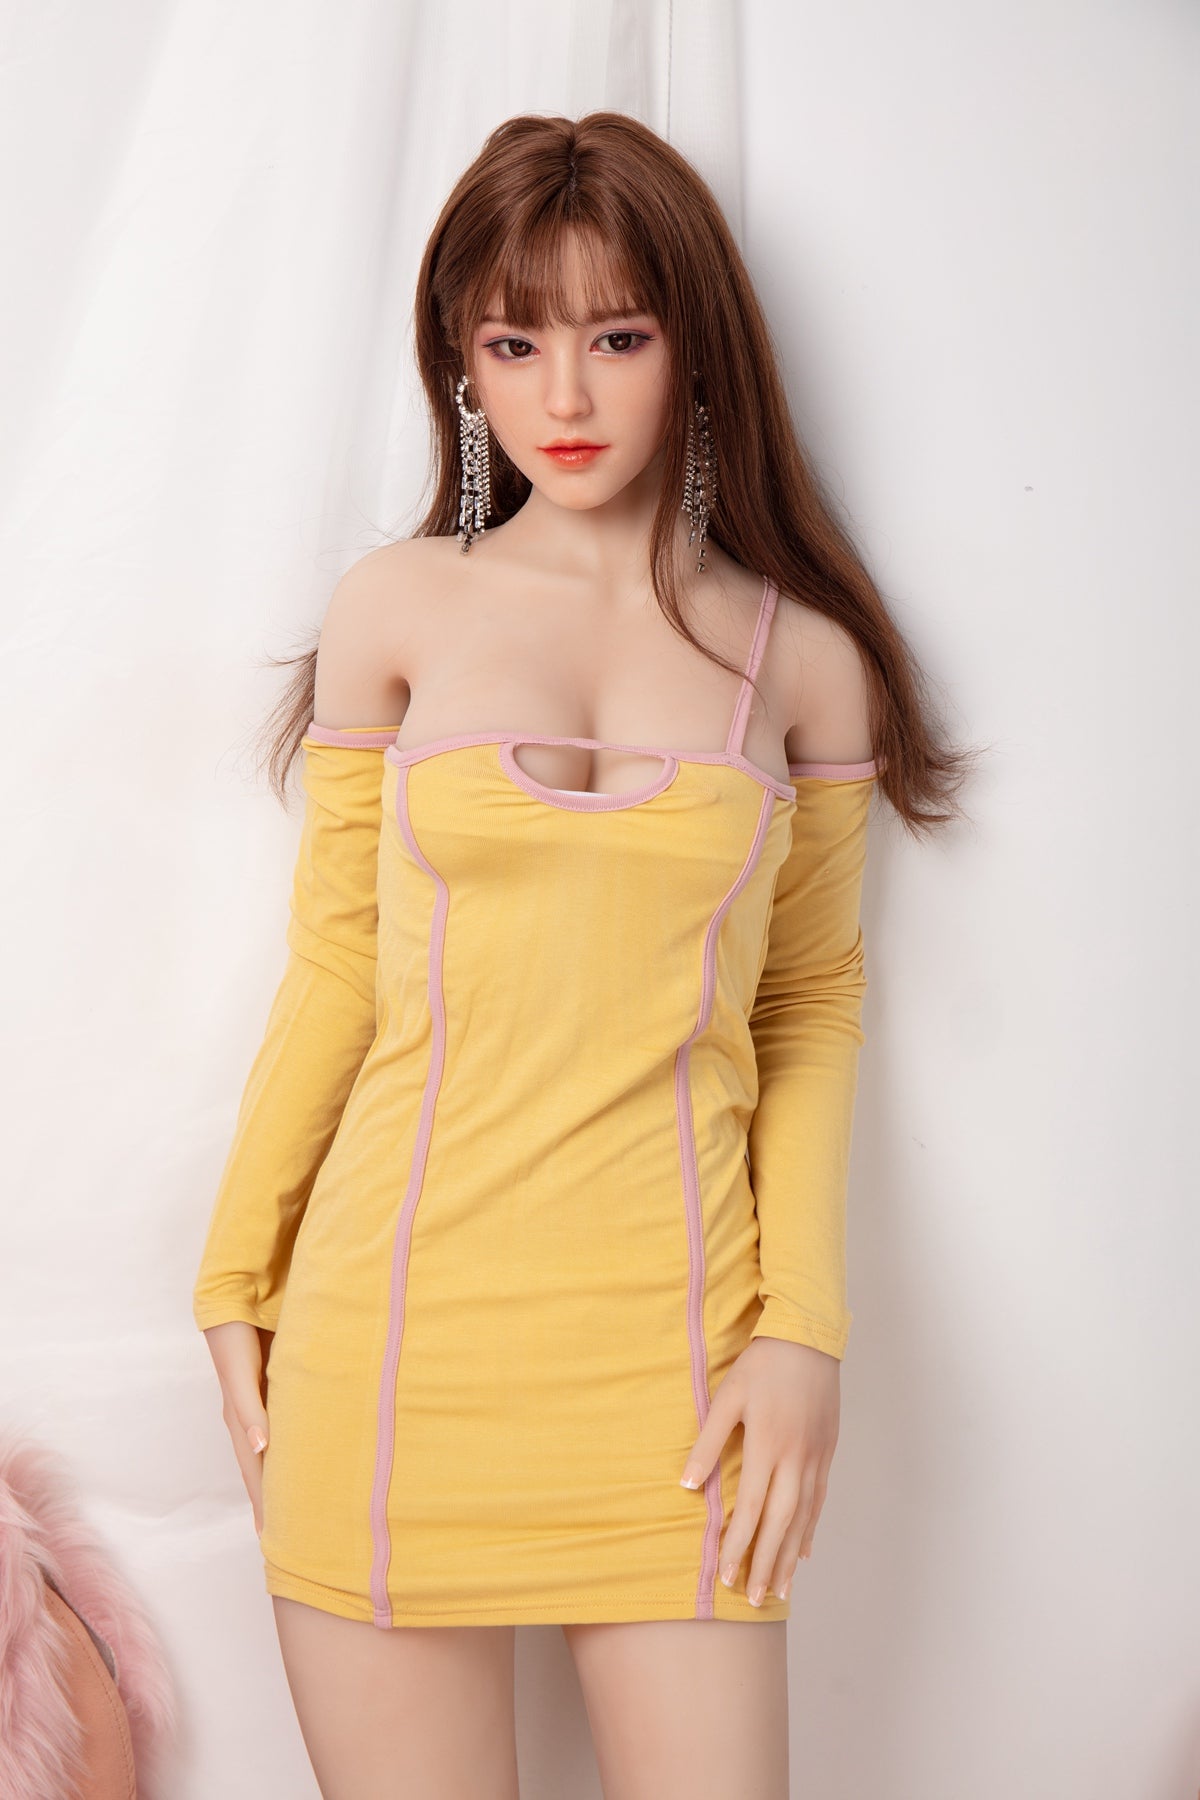 160cm D-CUP Asian Teen Sex Doll Long Implanted Hair Silicone sex doll